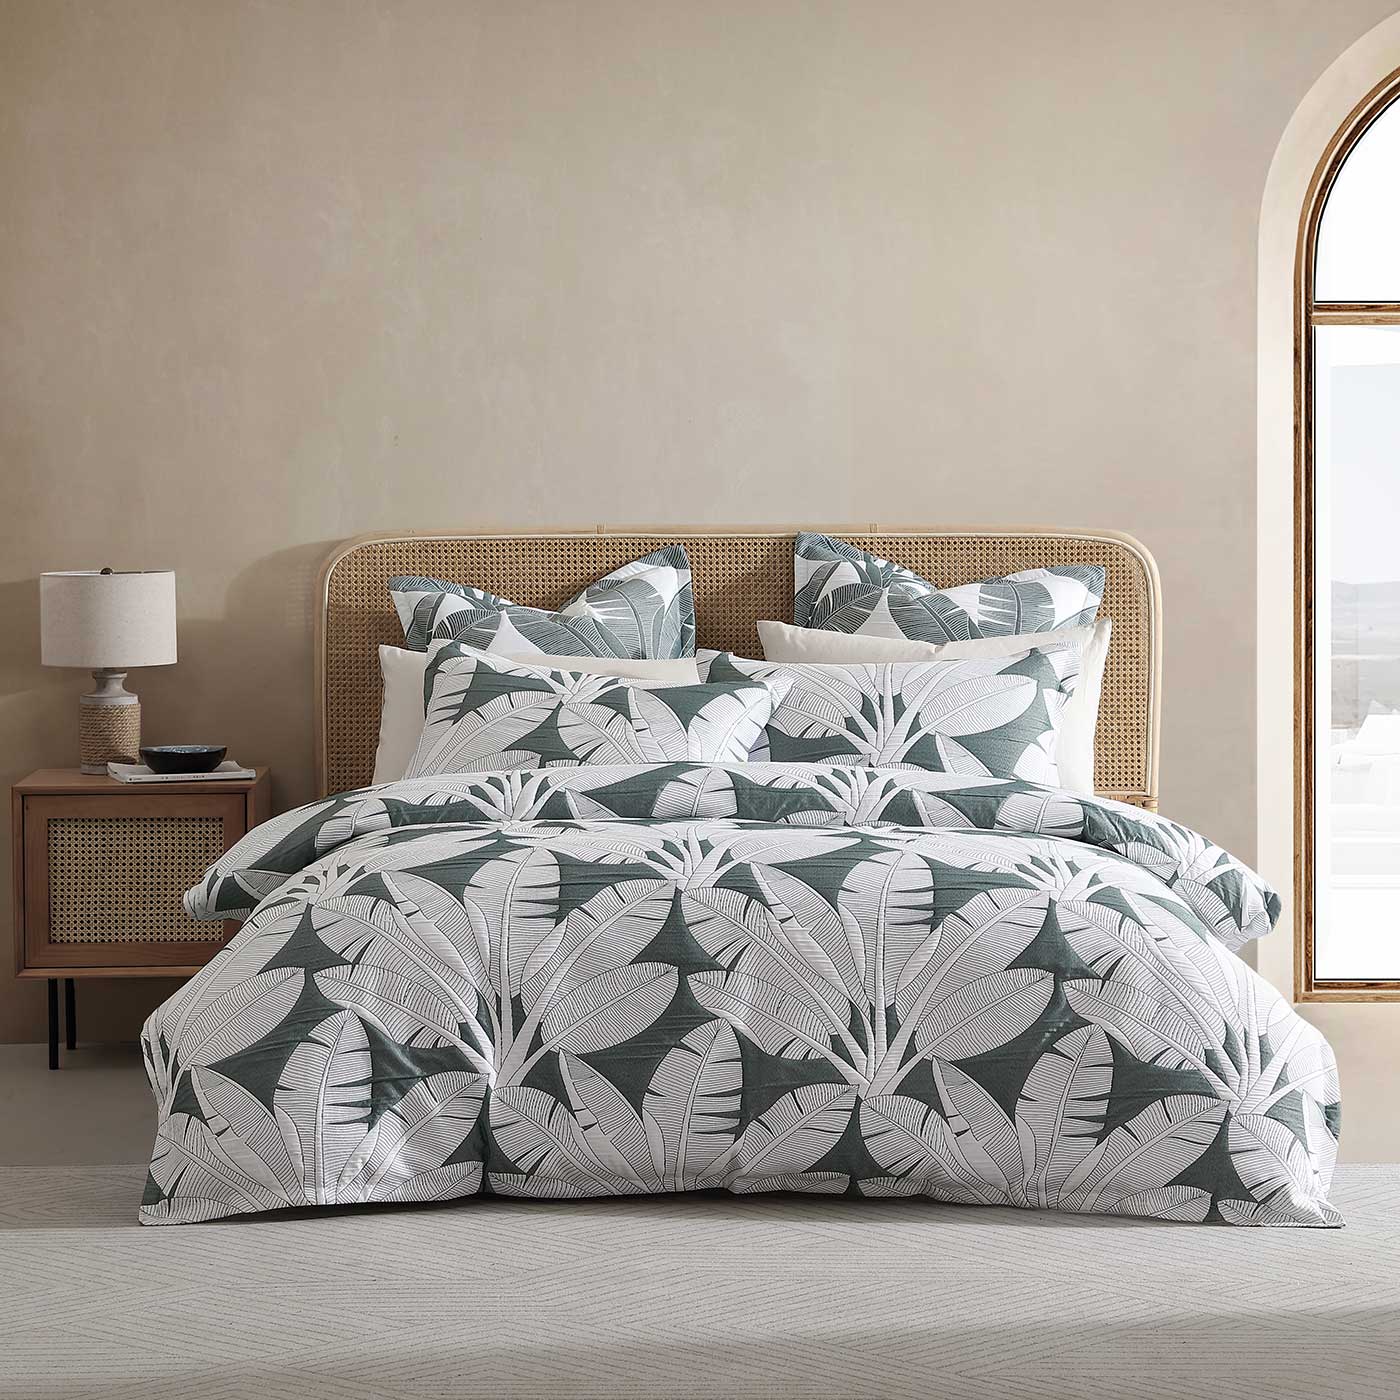 Bring a tranquil island getaway to your bedroom with the Lagos Olive Quilt Cover Set. Anchored by a lush olive ground, its large-scale white banana leaf pattern creates a bright and vibrant oasis.